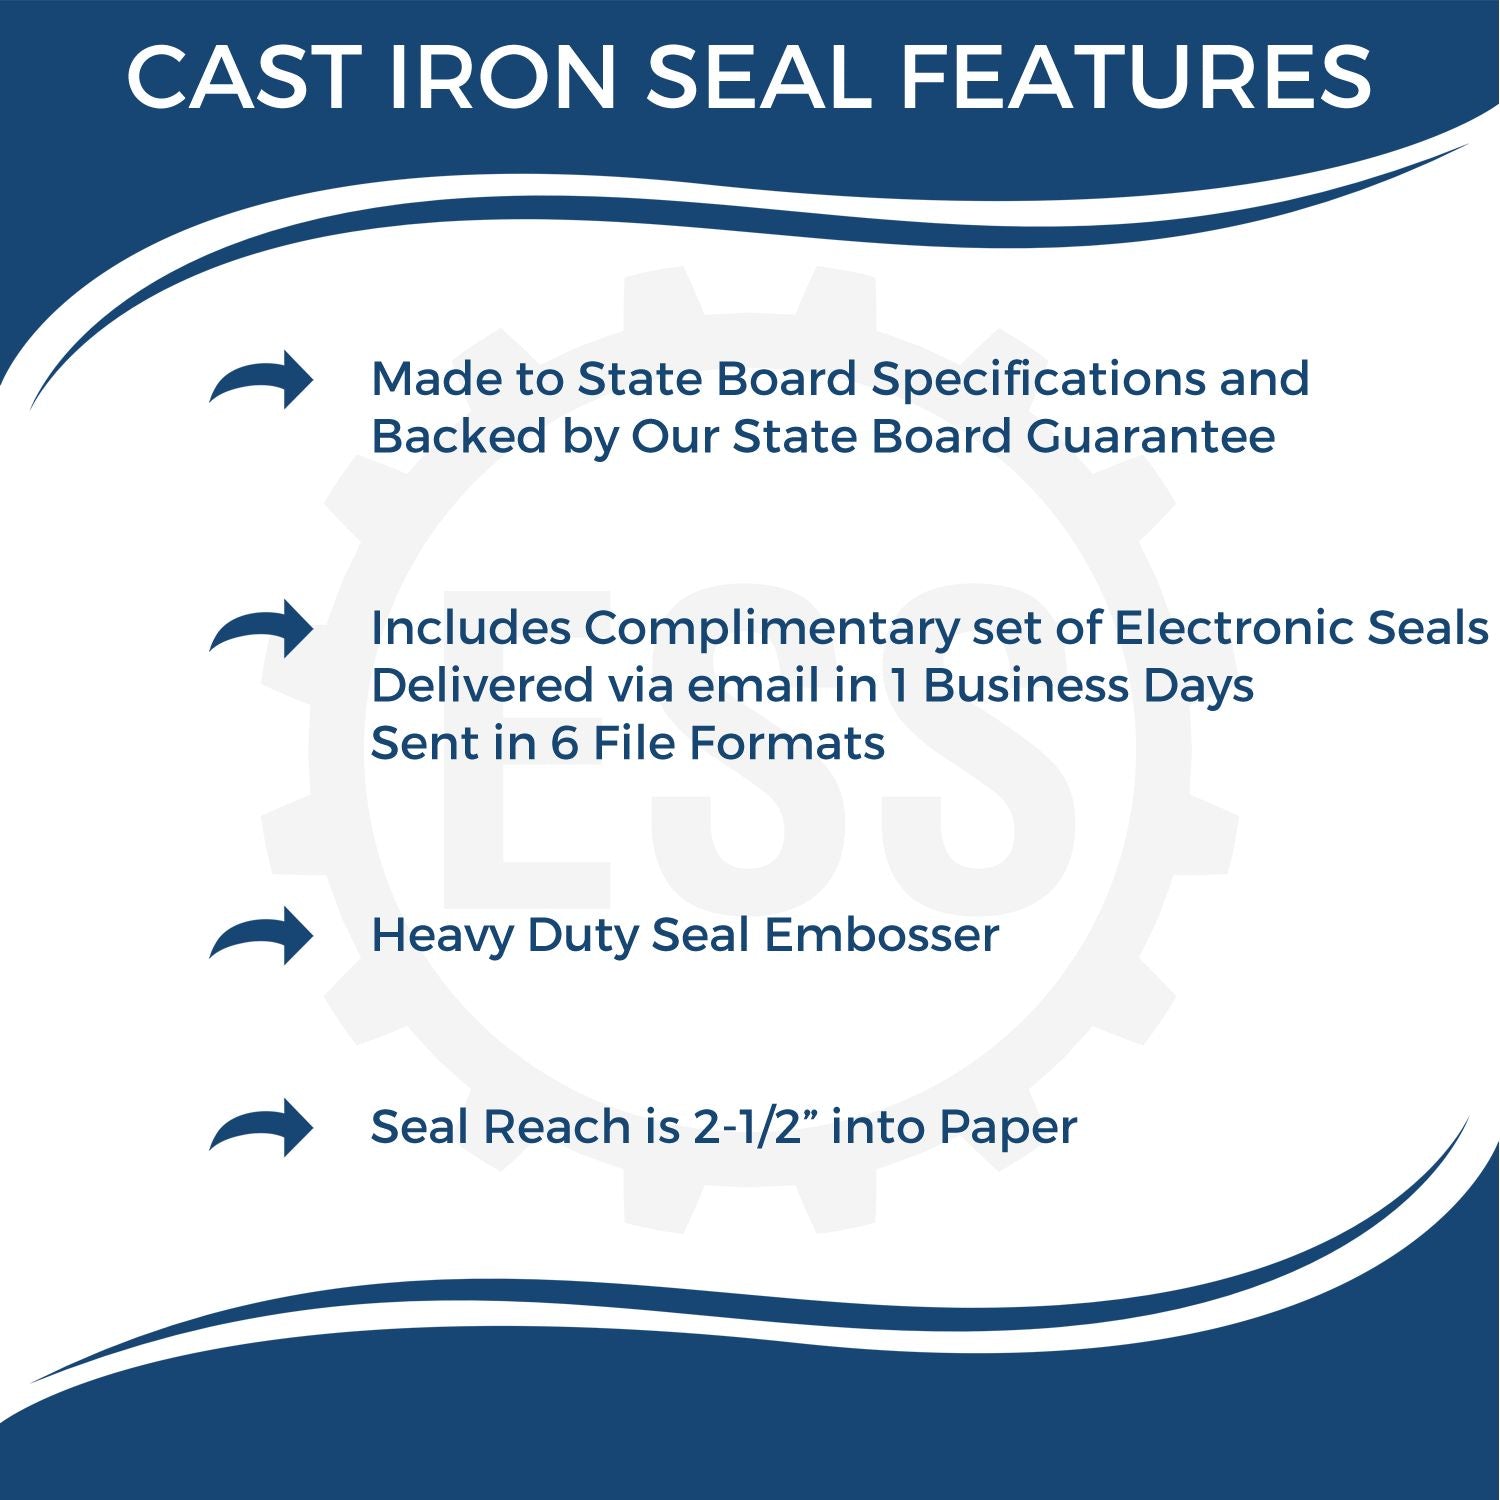 The main image for the Heavy Duty Cast Iron Maine Engineer Seal Embosser depicting a sample of the imprint and electronic files